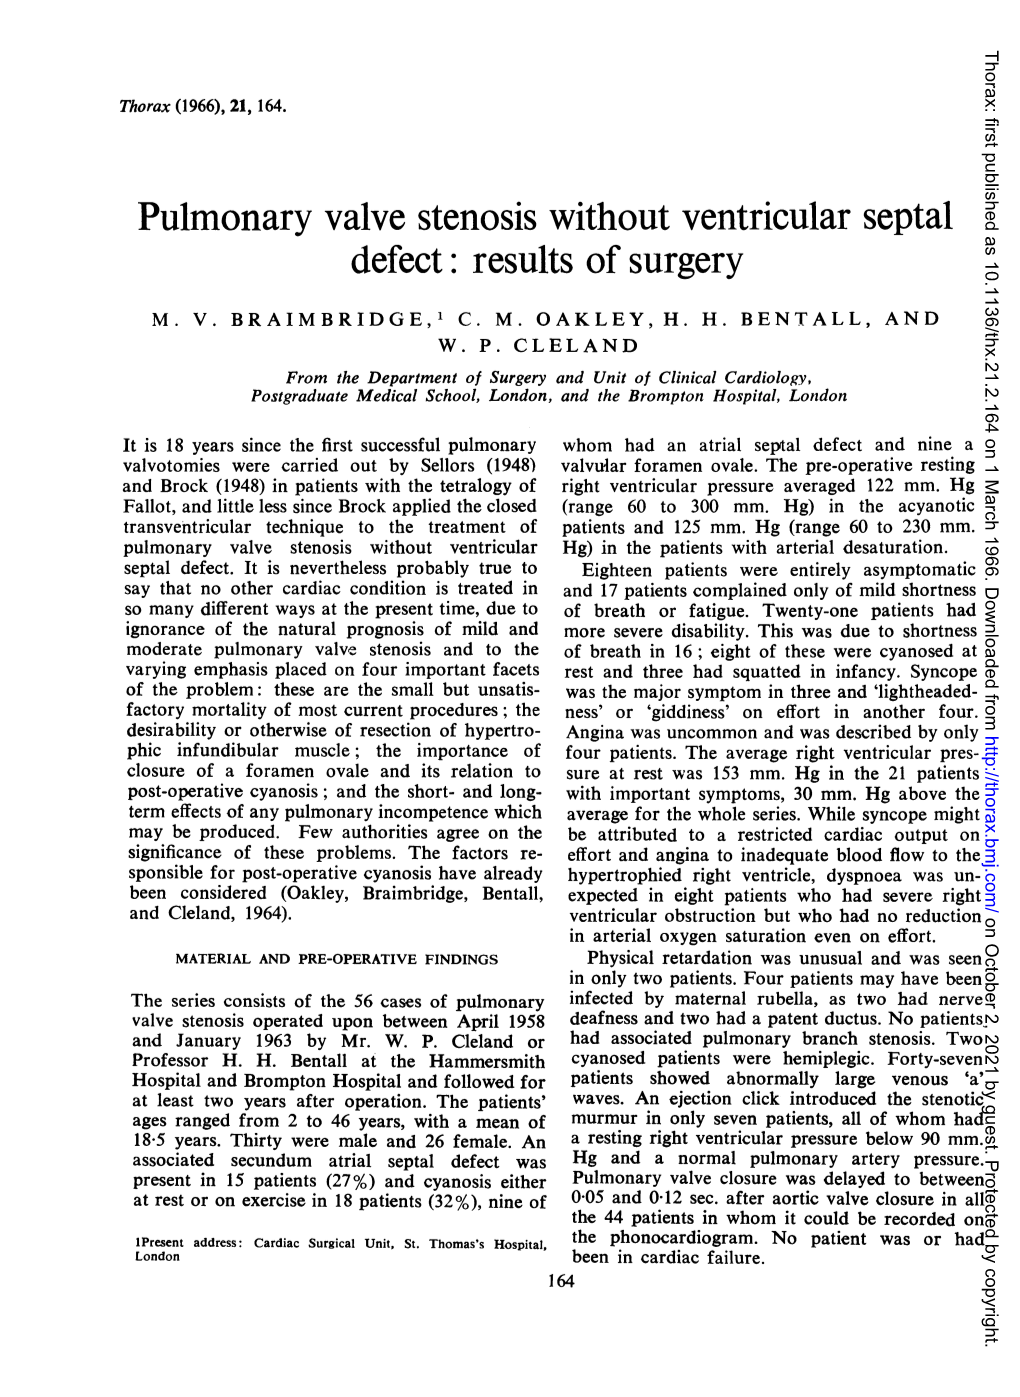 Pulmonary Valve Stenosis Without Ventricular Septal Defect: Results of Surgery